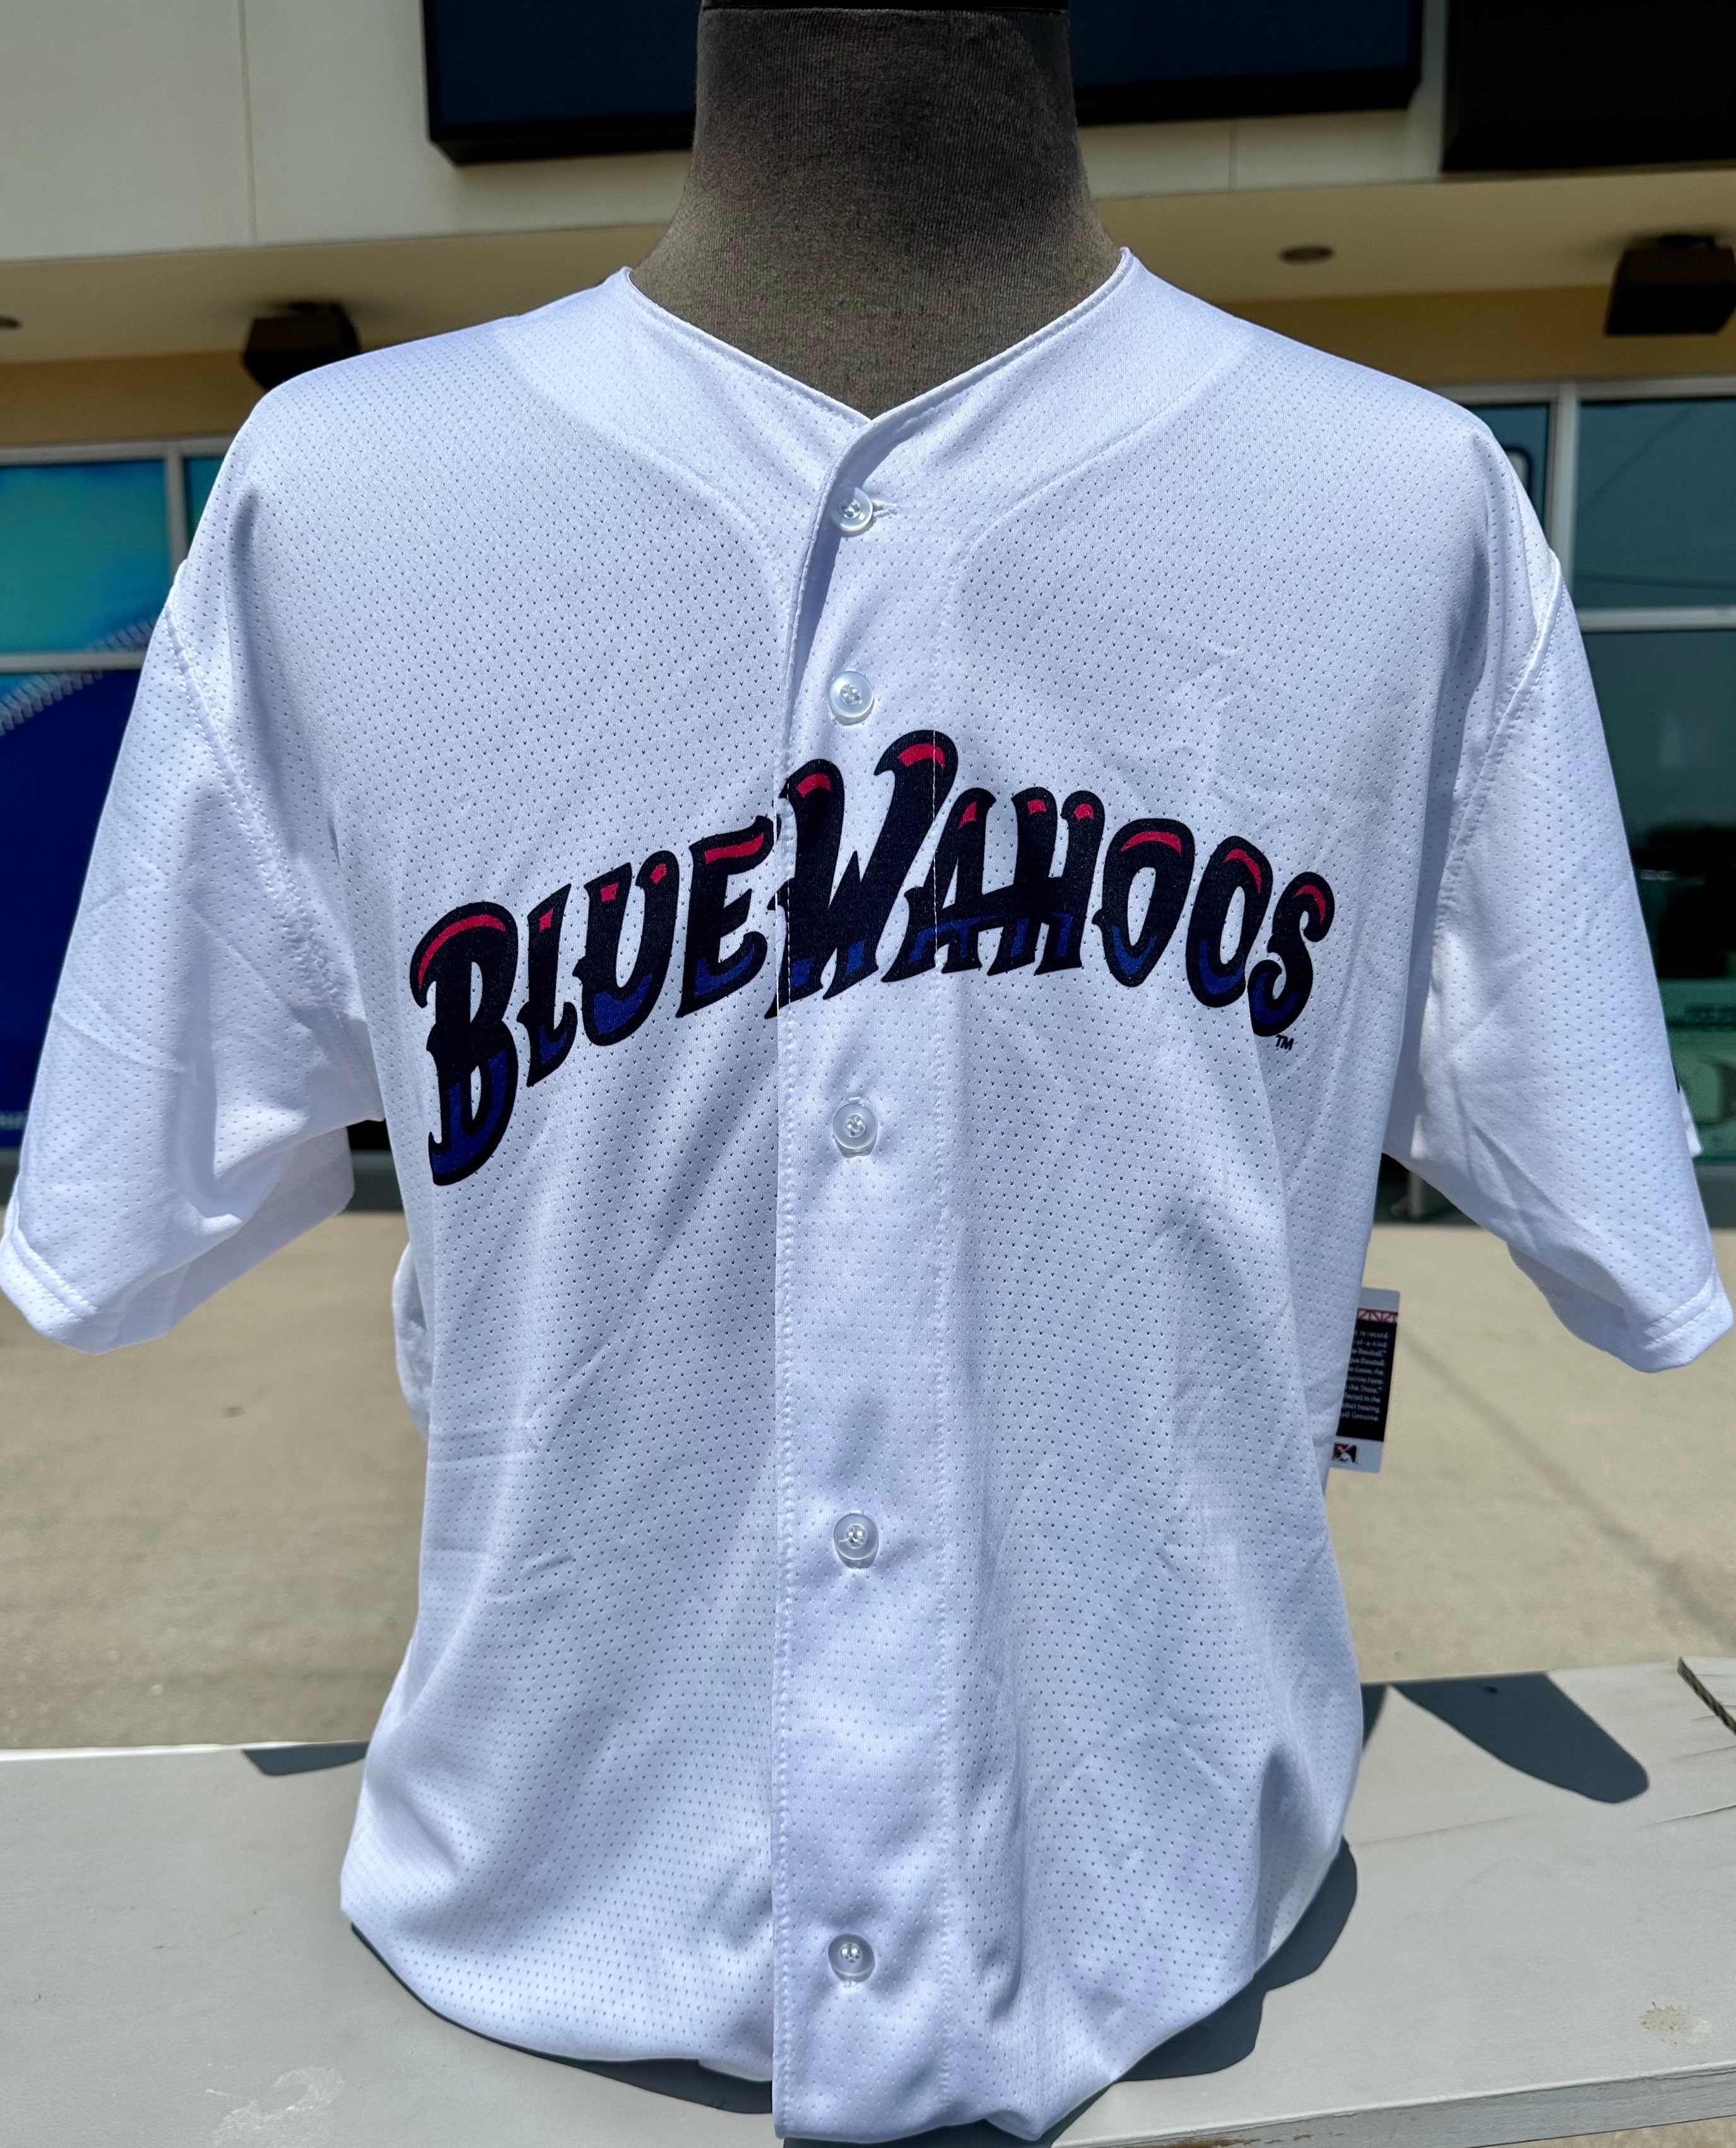 Pensacola welcomes The Blue Wahoos!